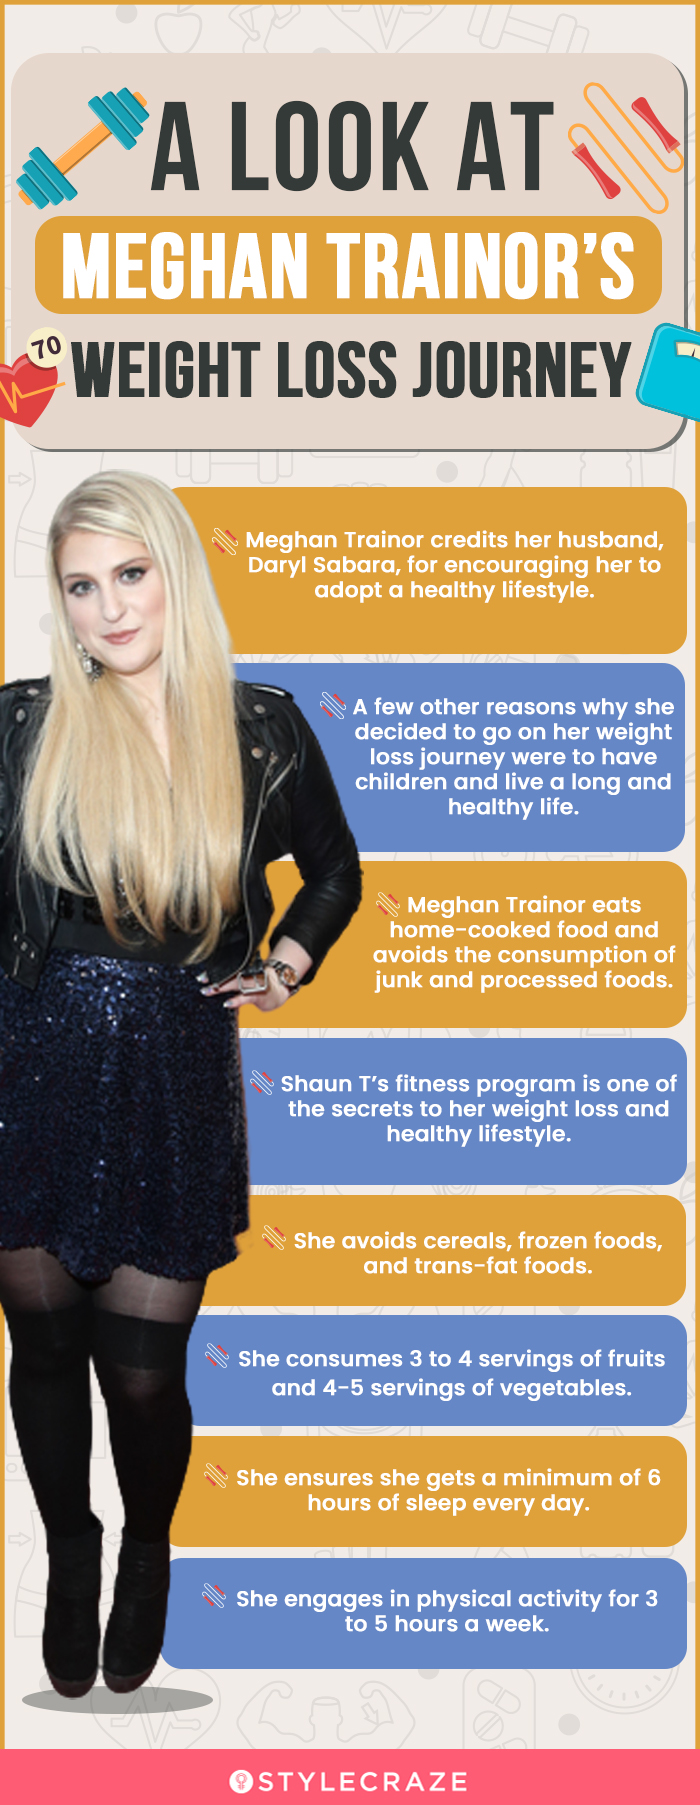 a look at meghan trainor’s weight loss journey (infographic)